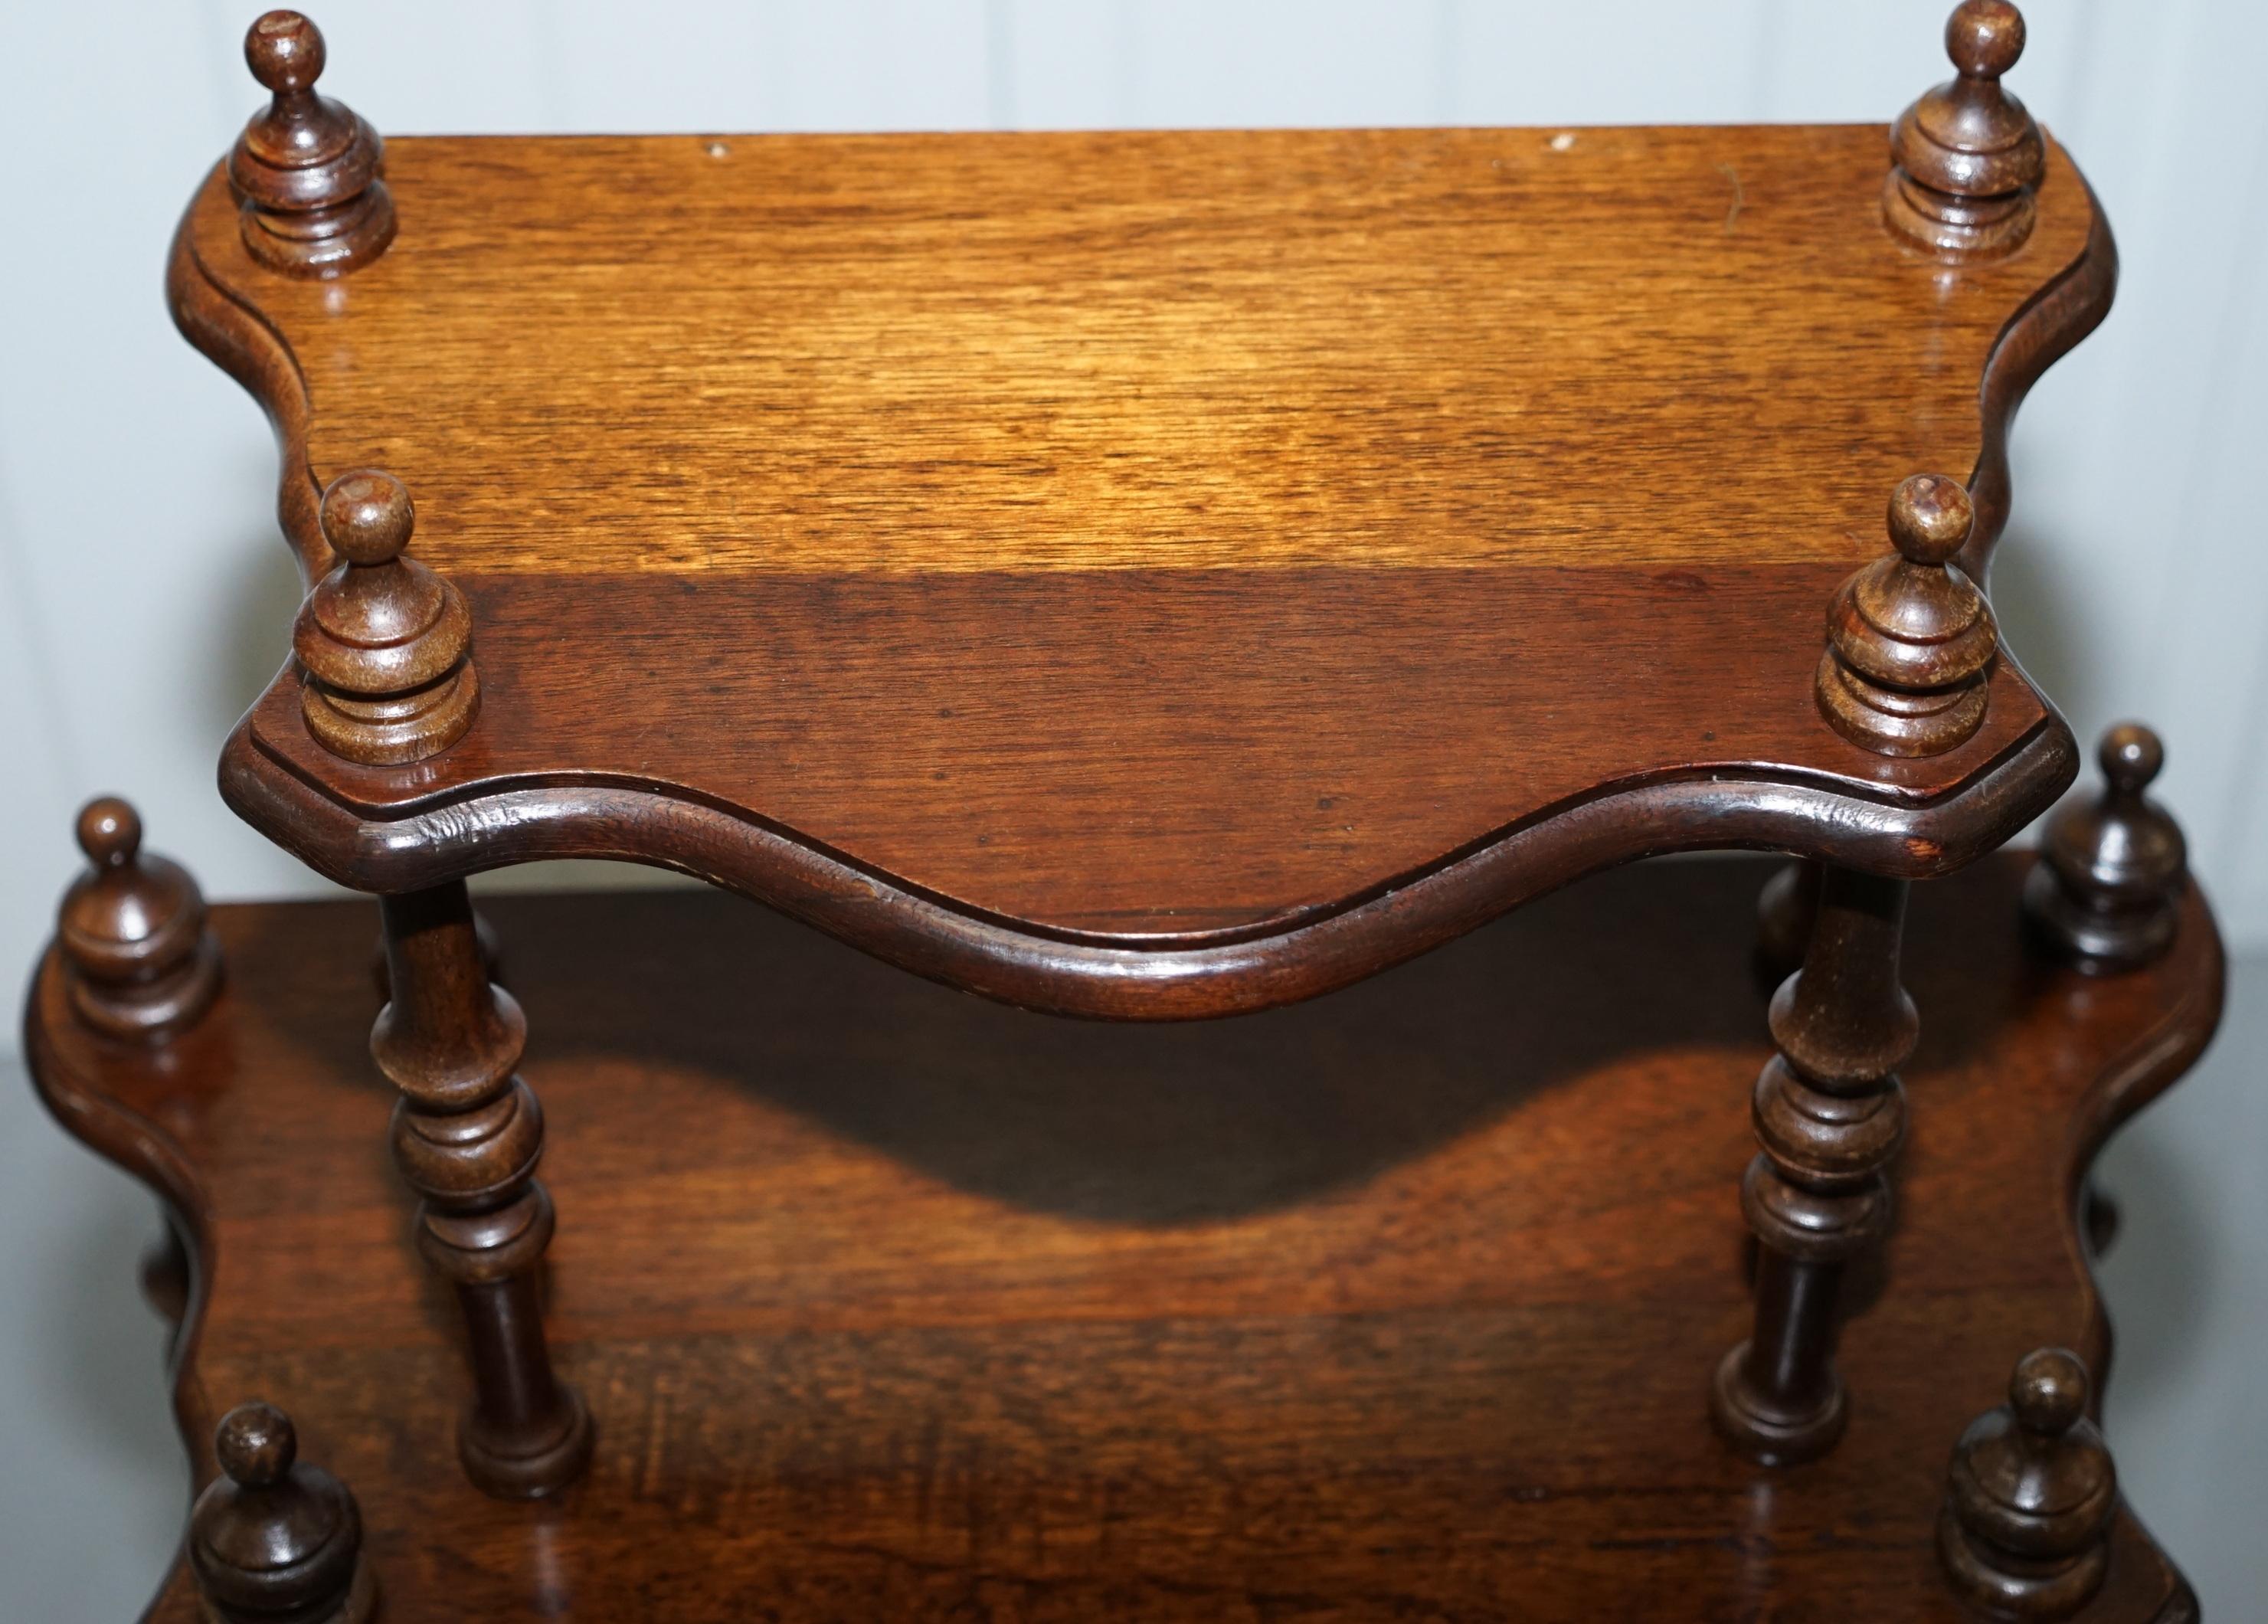 Hand-Carved Lovely Small Mahogany Whatnot Bookcase Nicely Turned Pillars Functional Piece